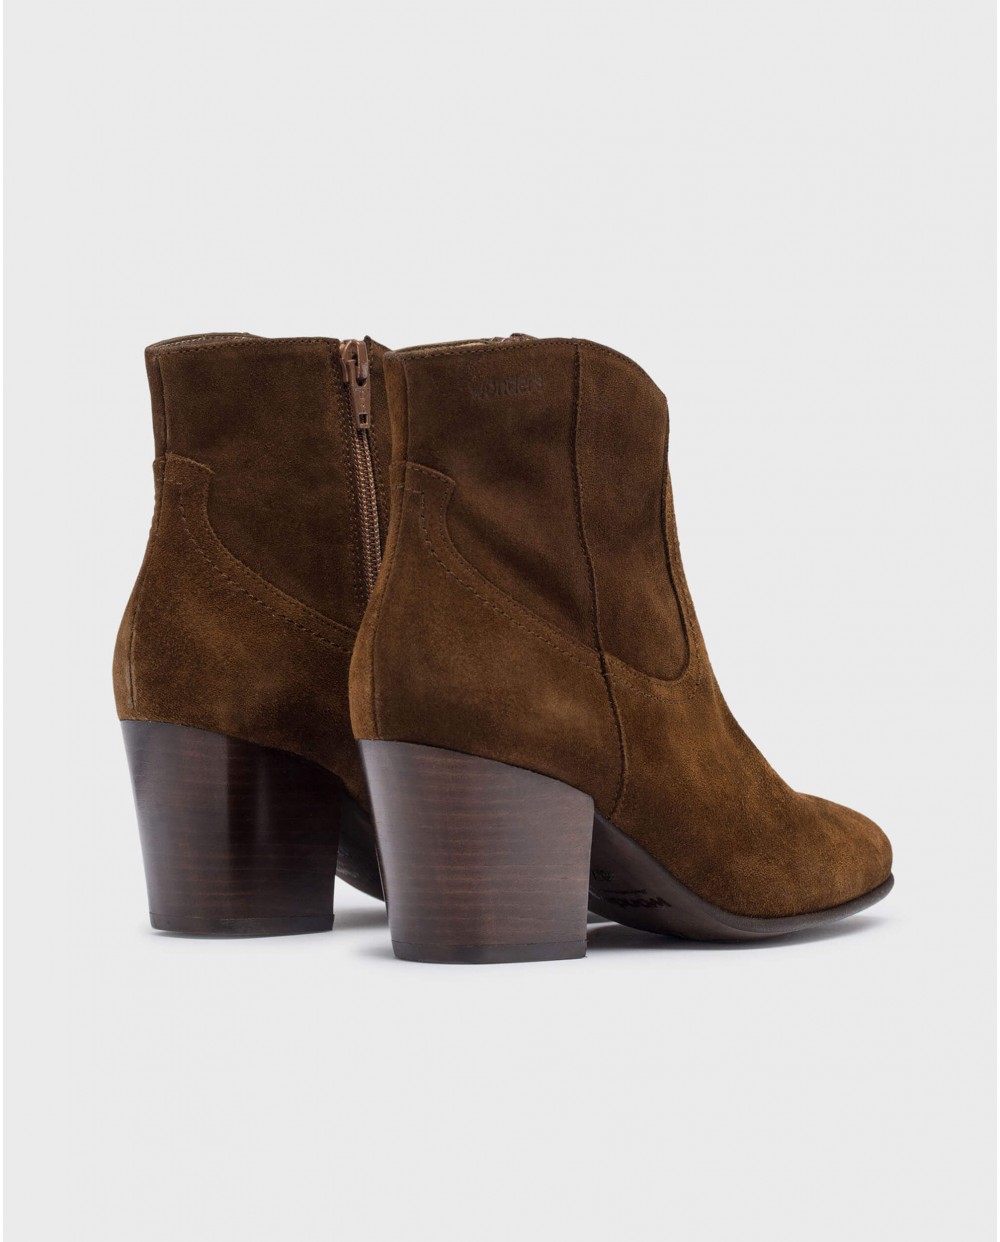 Wonders-Ankle Boots-Brown CANE ankle boot